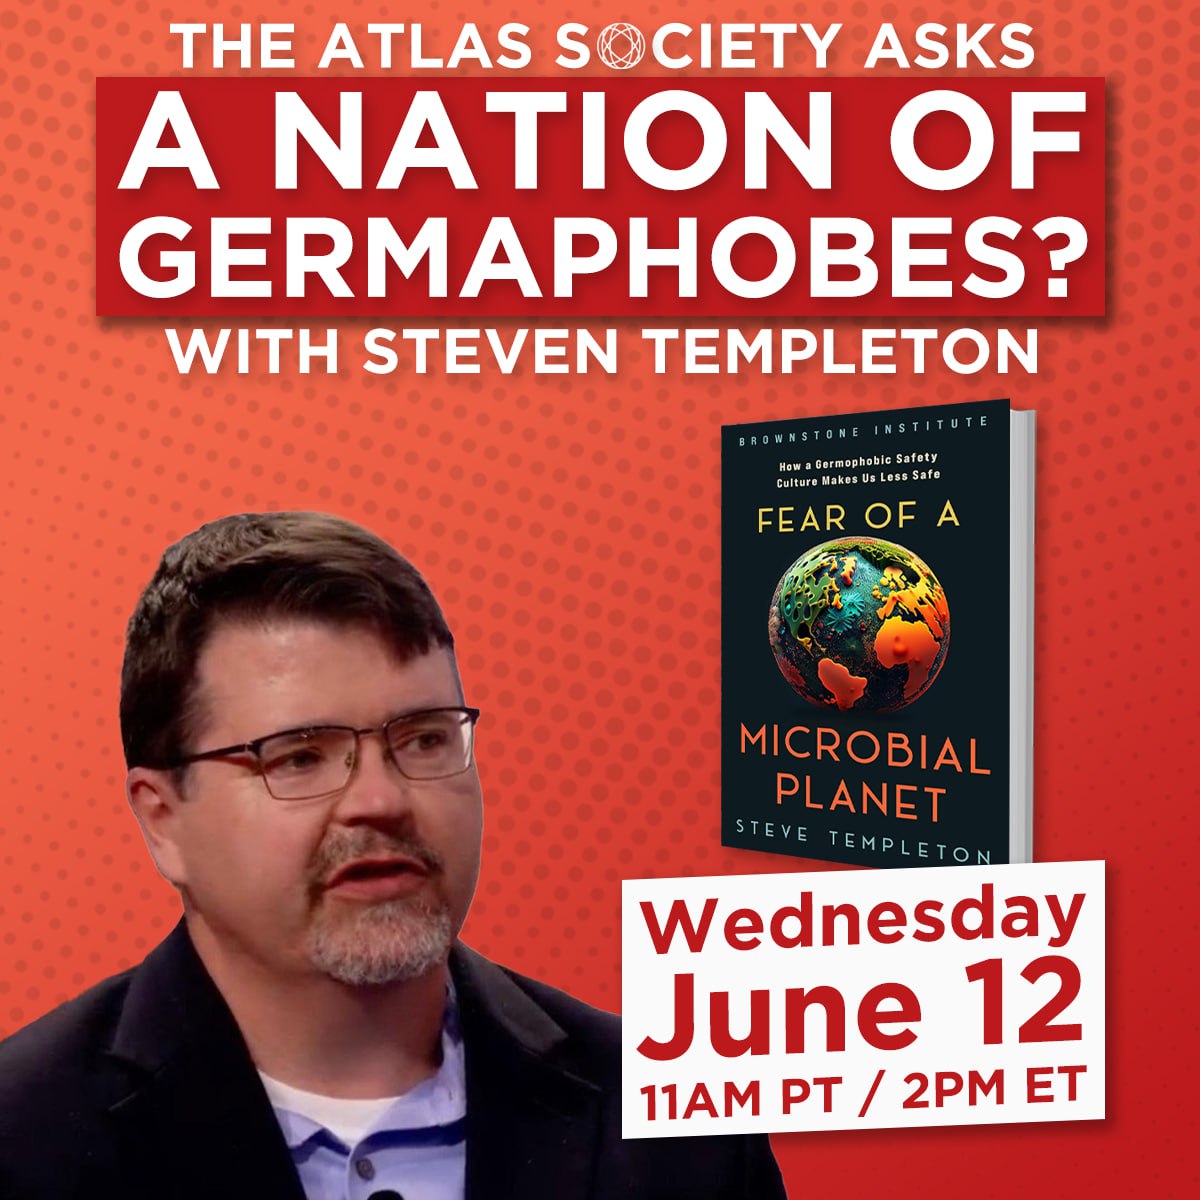 A Nation of Germaphobes? with Steve Templeton